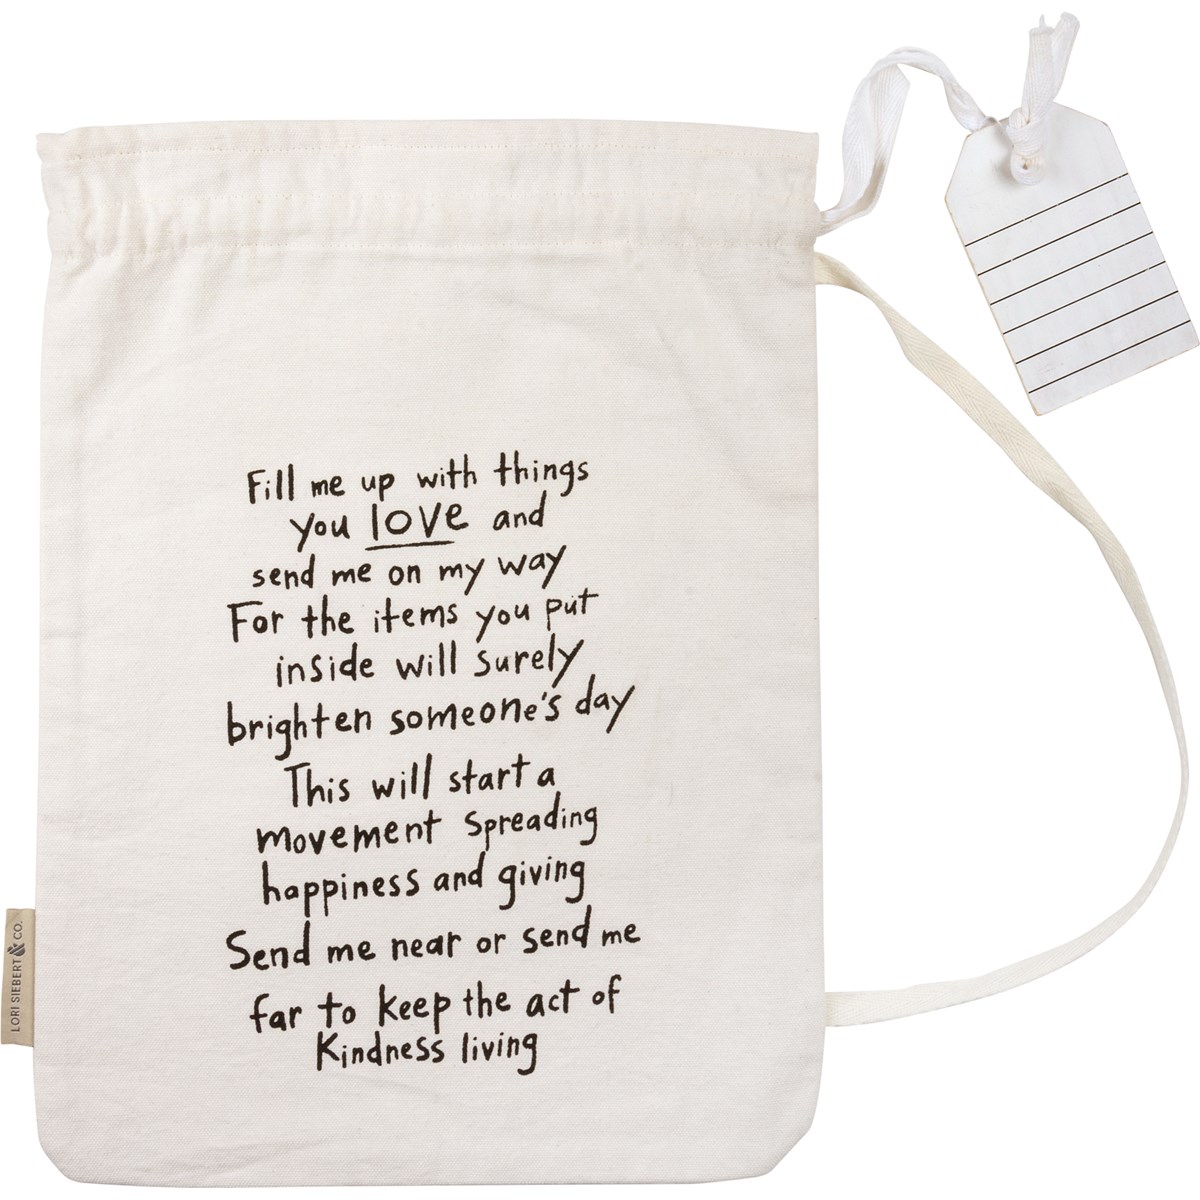 The Act Of Kindness Giving Bag - Cotton, Canvas, Wood